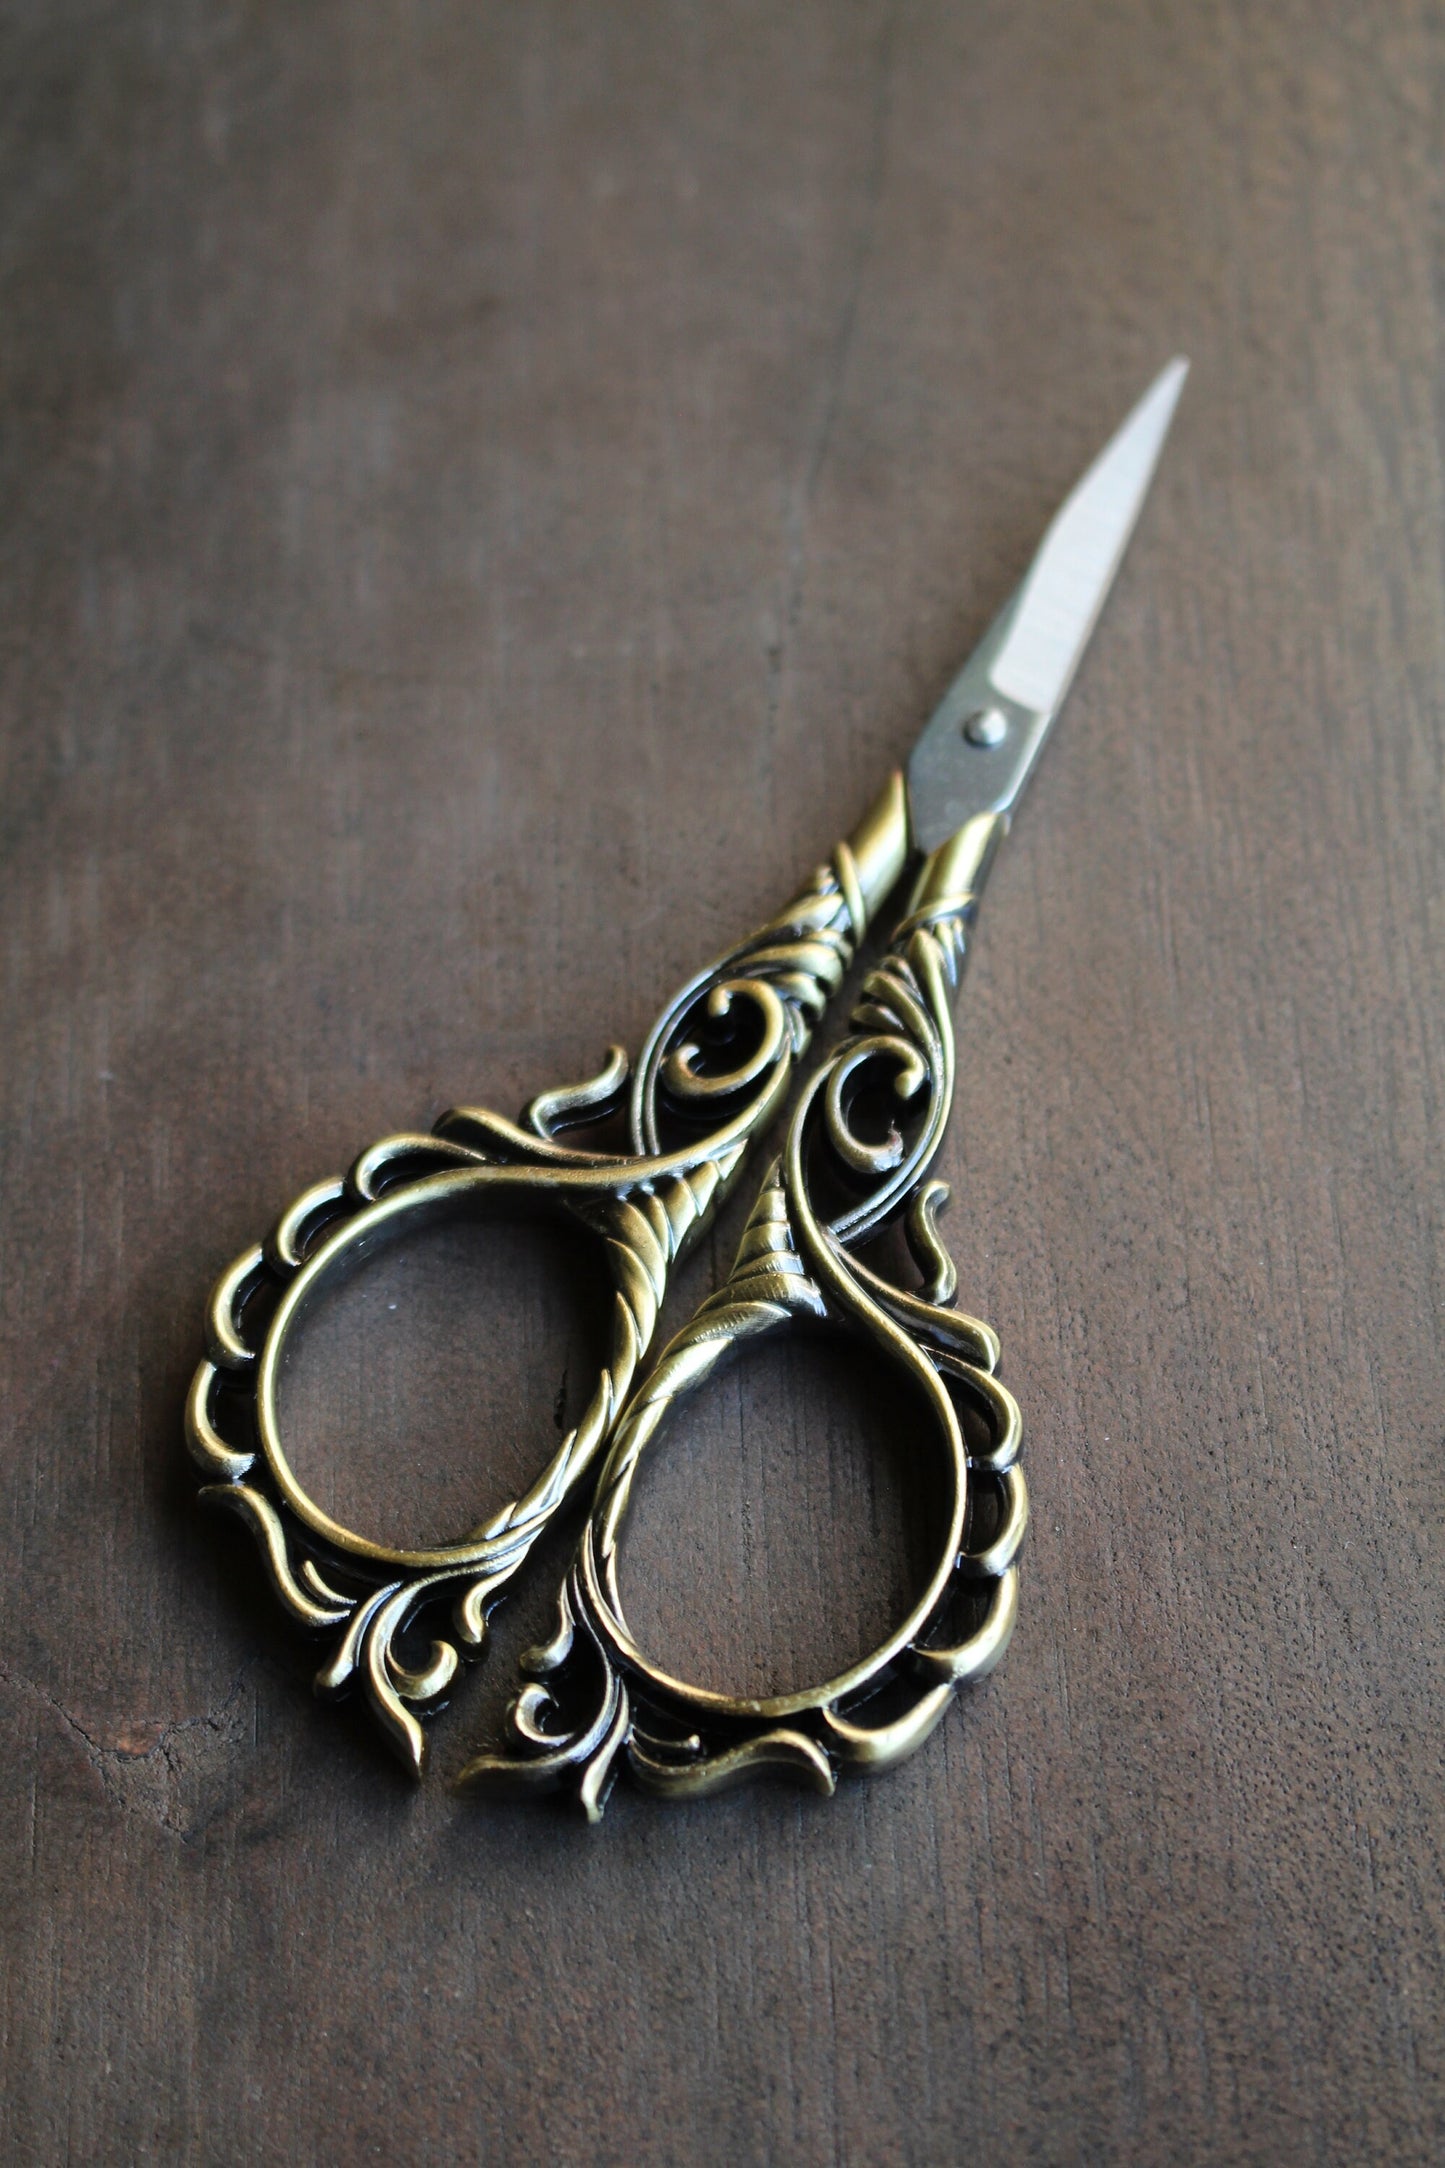 Entwined Embroidery Scissors • Ornate Vintage Style Quilting Scissors in Antique Gold and Copper • Unique Embroidery Gifts and Sewing Gifts